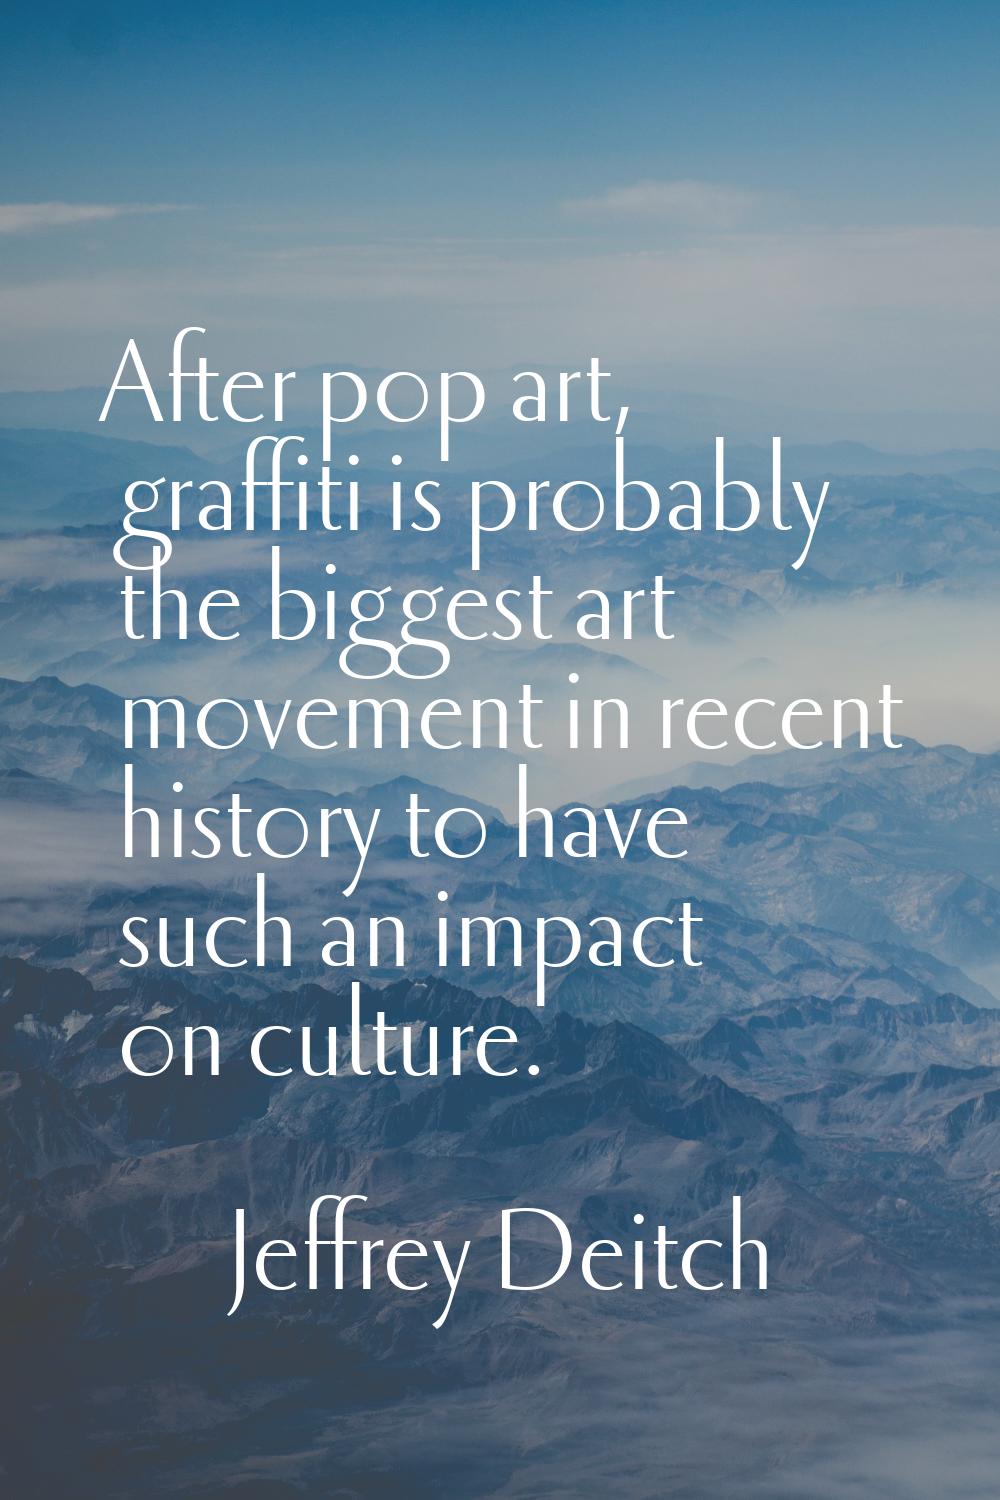 After pop art, graffiti is probably the biggest art movement in recent history to have such an impa